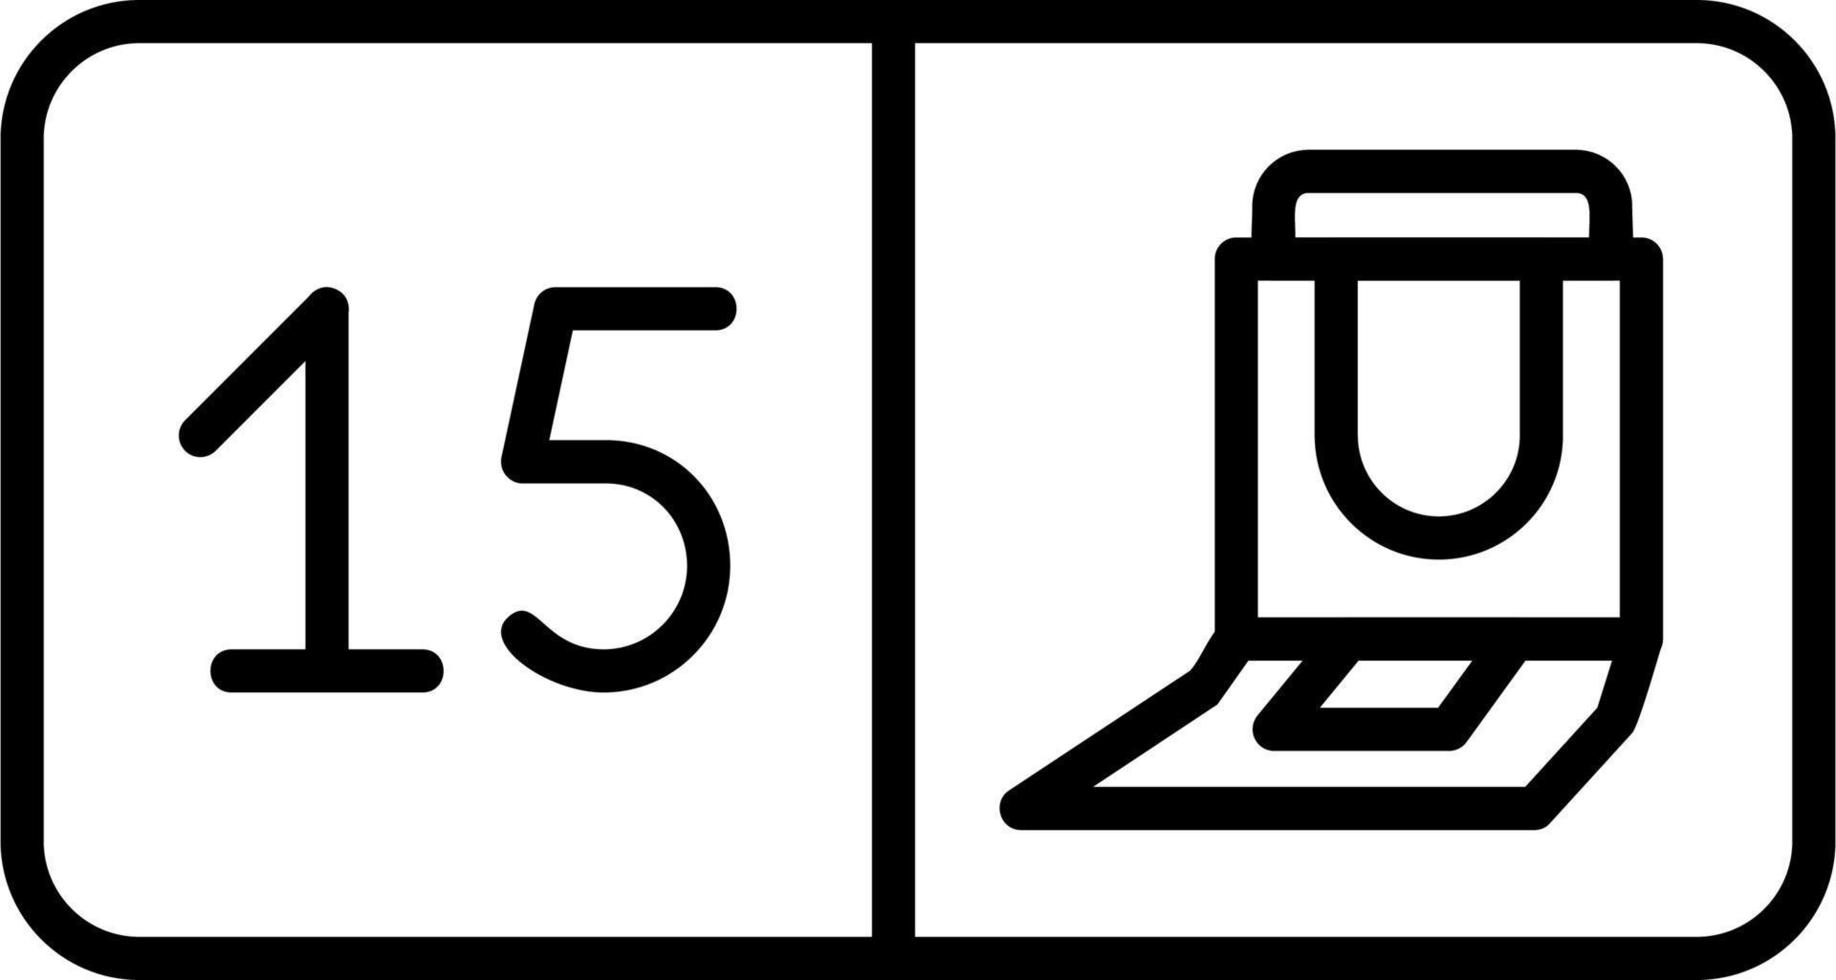 Seat Number Fifteen Vector Icon